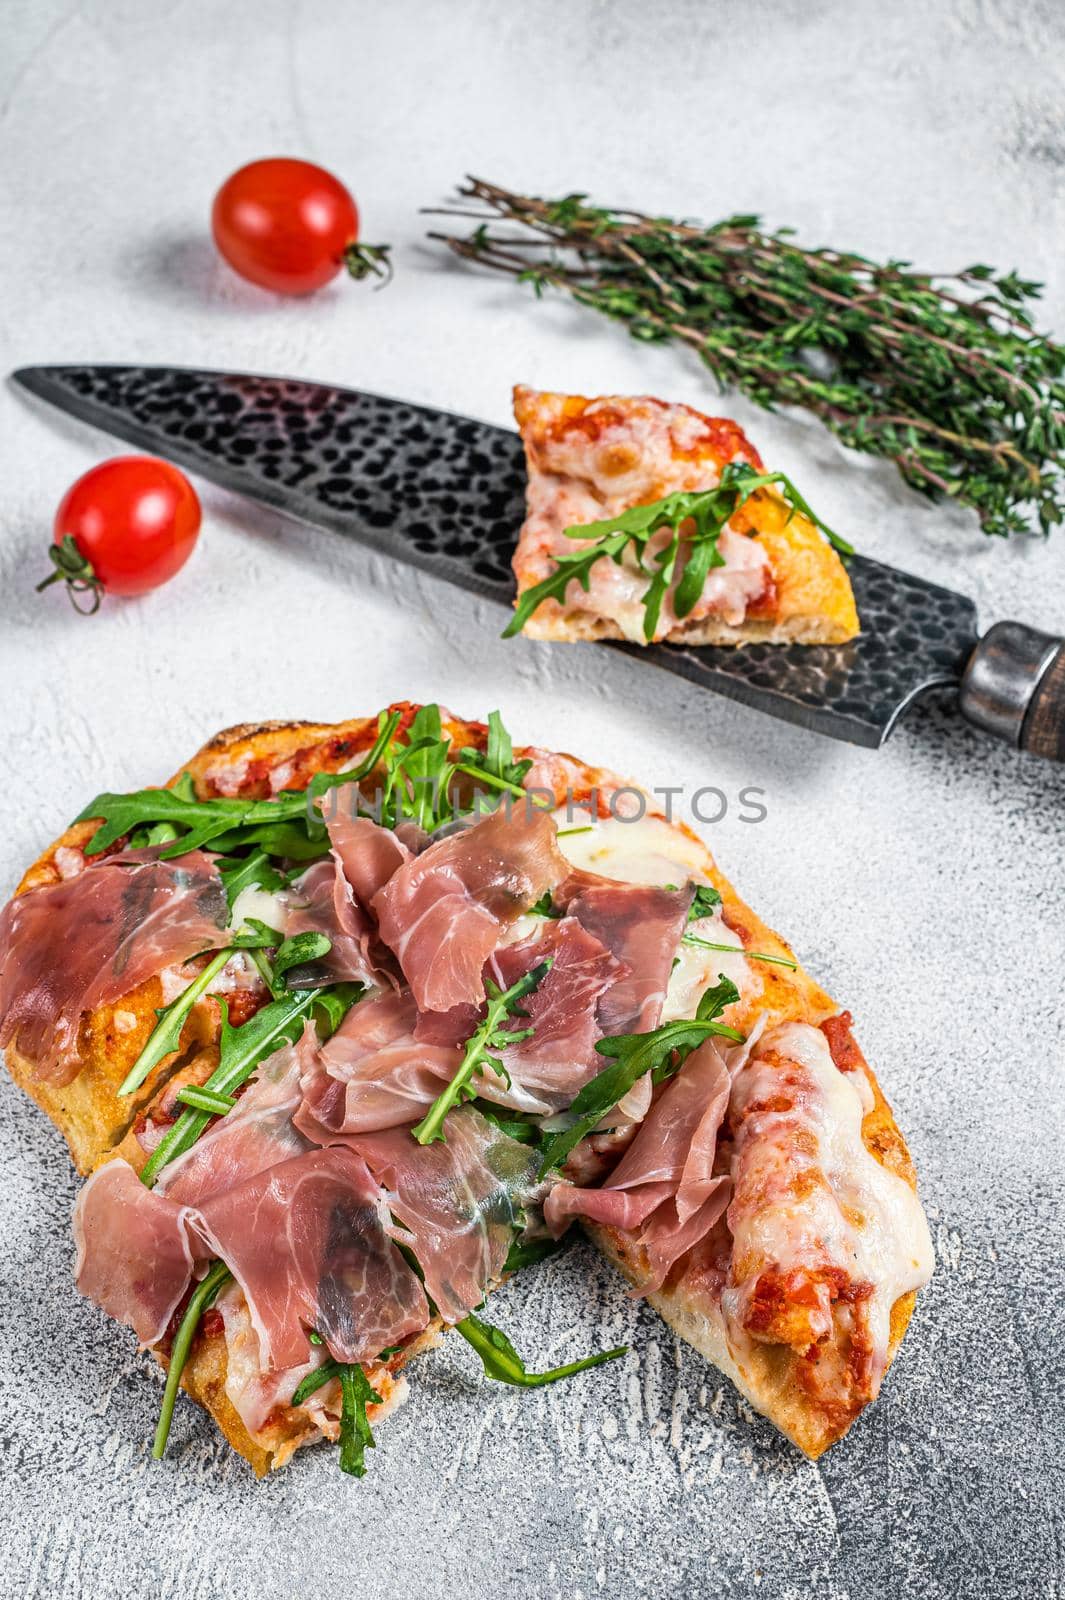 Italian Pizza with parma ham, arugula and cheeseon a kitchen table. White background. Top view by Composter